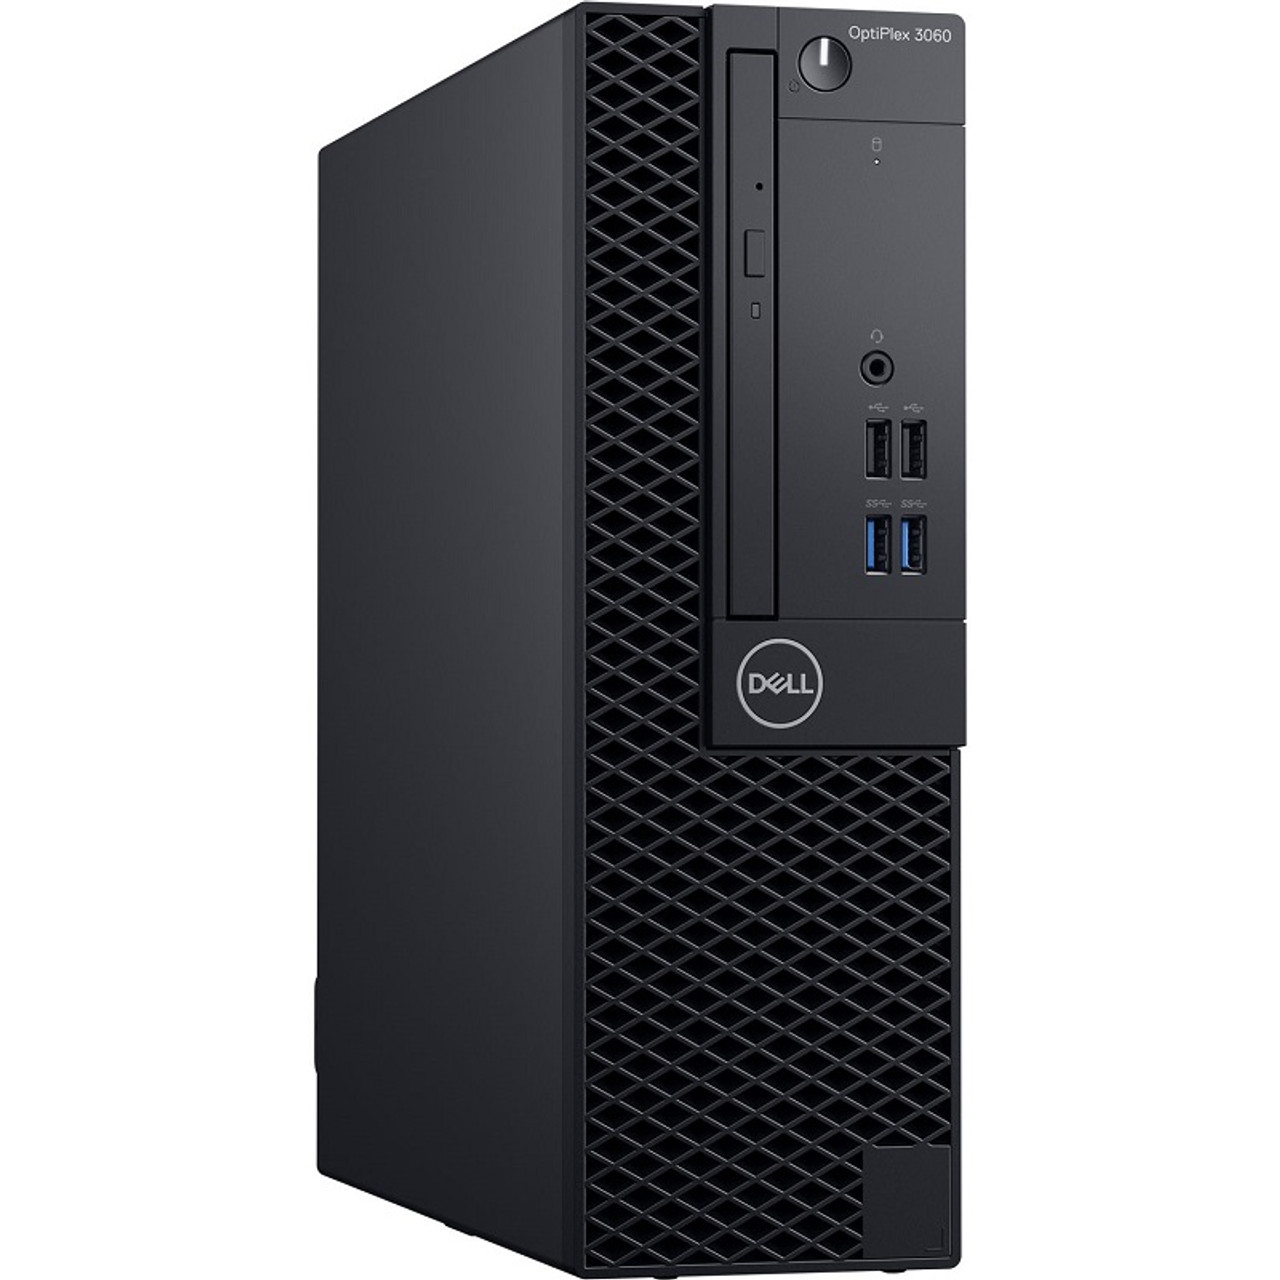 Dell OptiPlex 3060 SFF Intel Core i7-8700 3.2GHz up to 4.6GHz 32GB